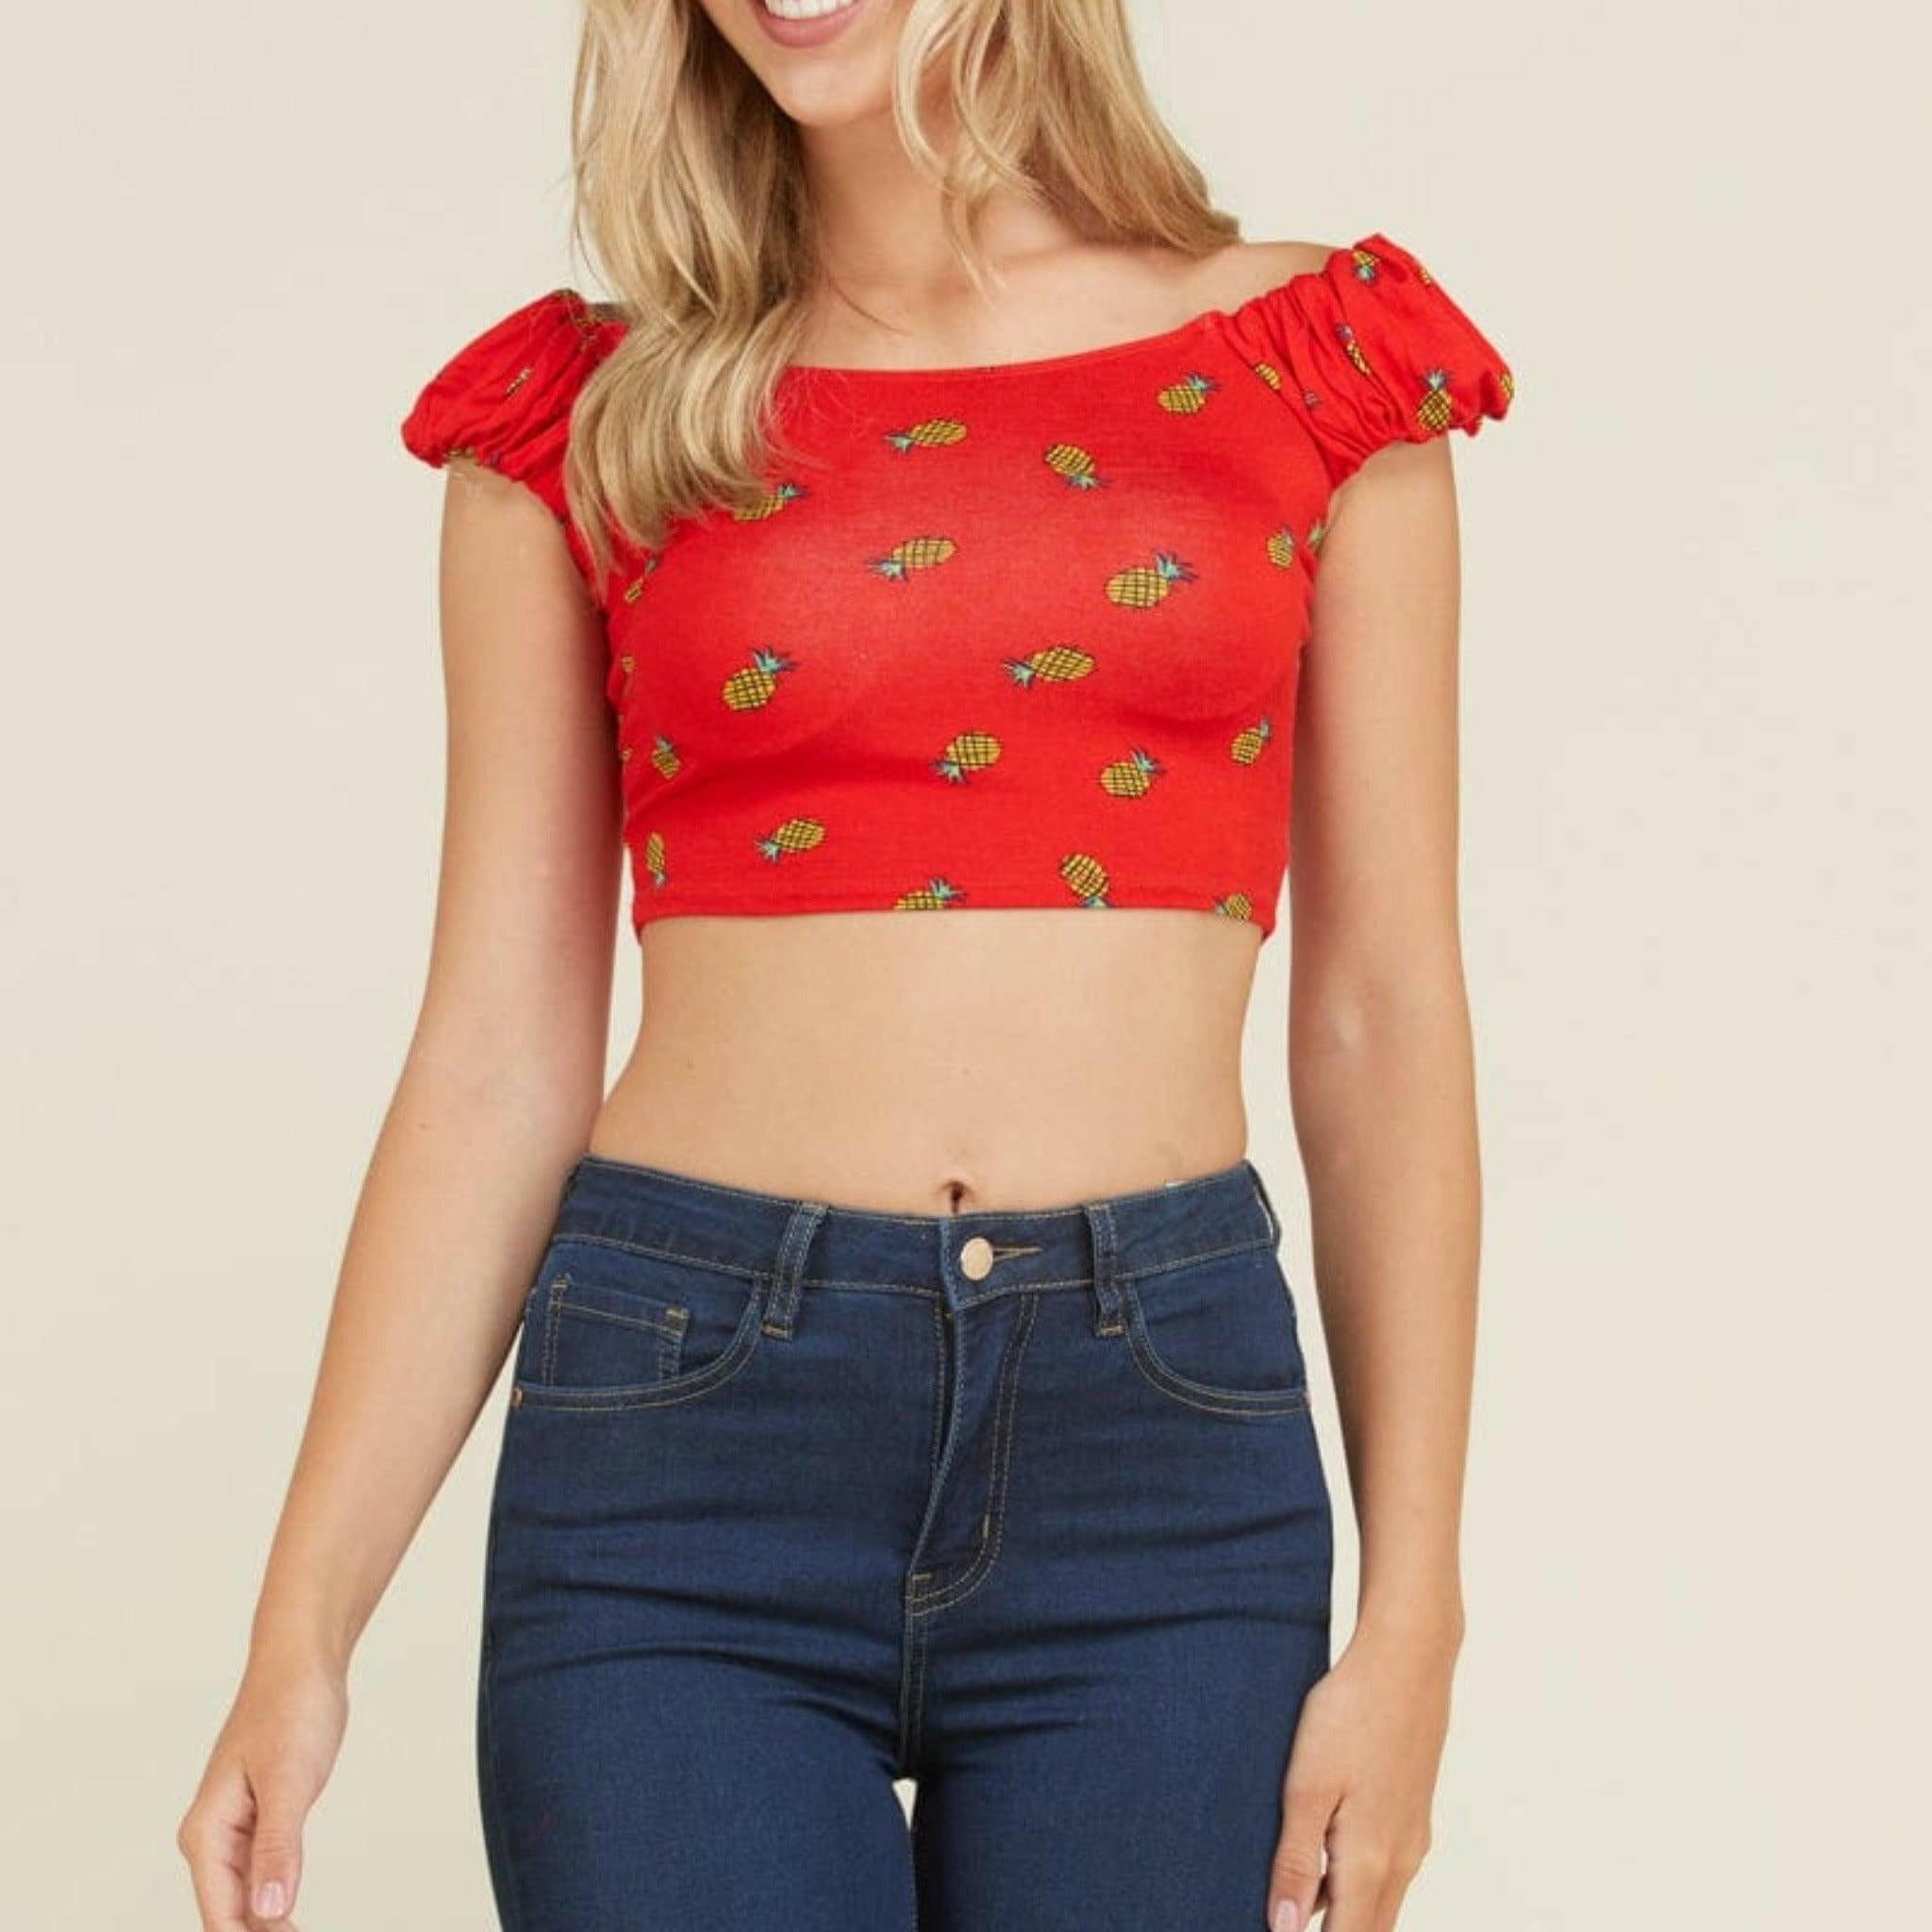 Epicplacess tops Red / SMALL / United States Ruffle Cute Sleeve Crop Tops 33224